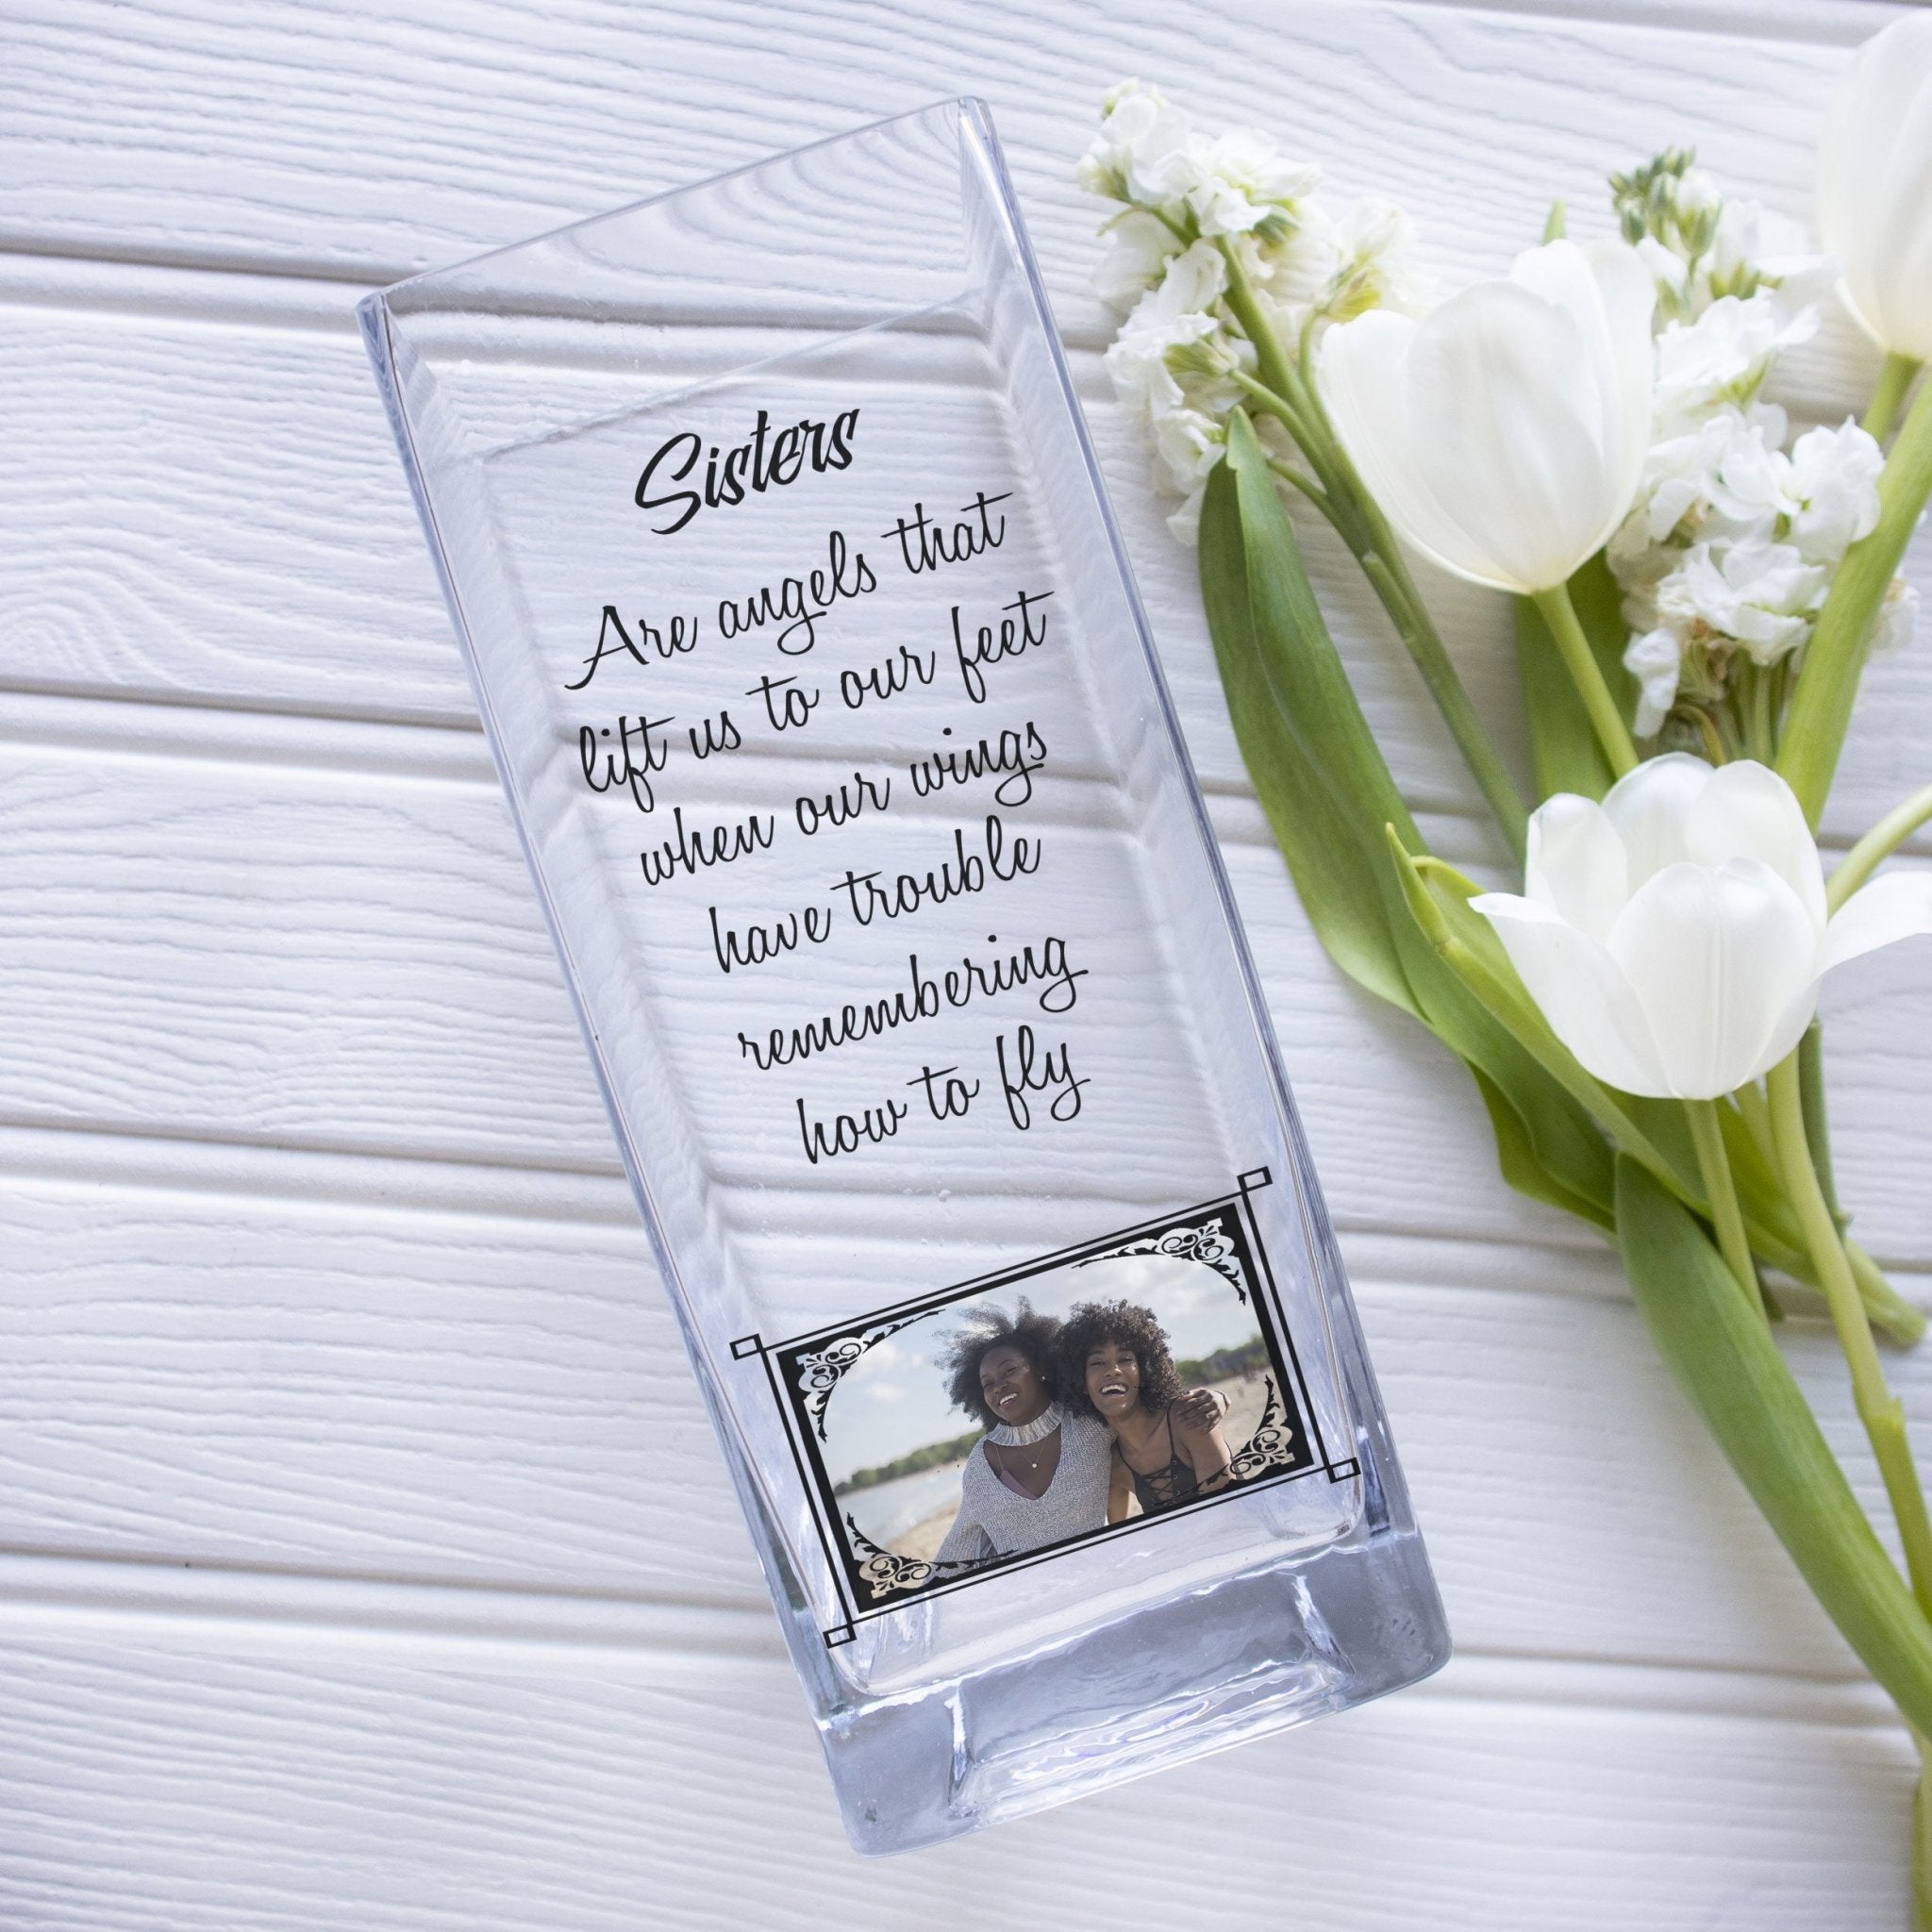 Sisters Quotes Customized Photo Glass Vase | Sis Quotation Gift Ideas | Personalized Acrylic Crystal Picture Flower Stand Home Decor Vase - Unique Prints